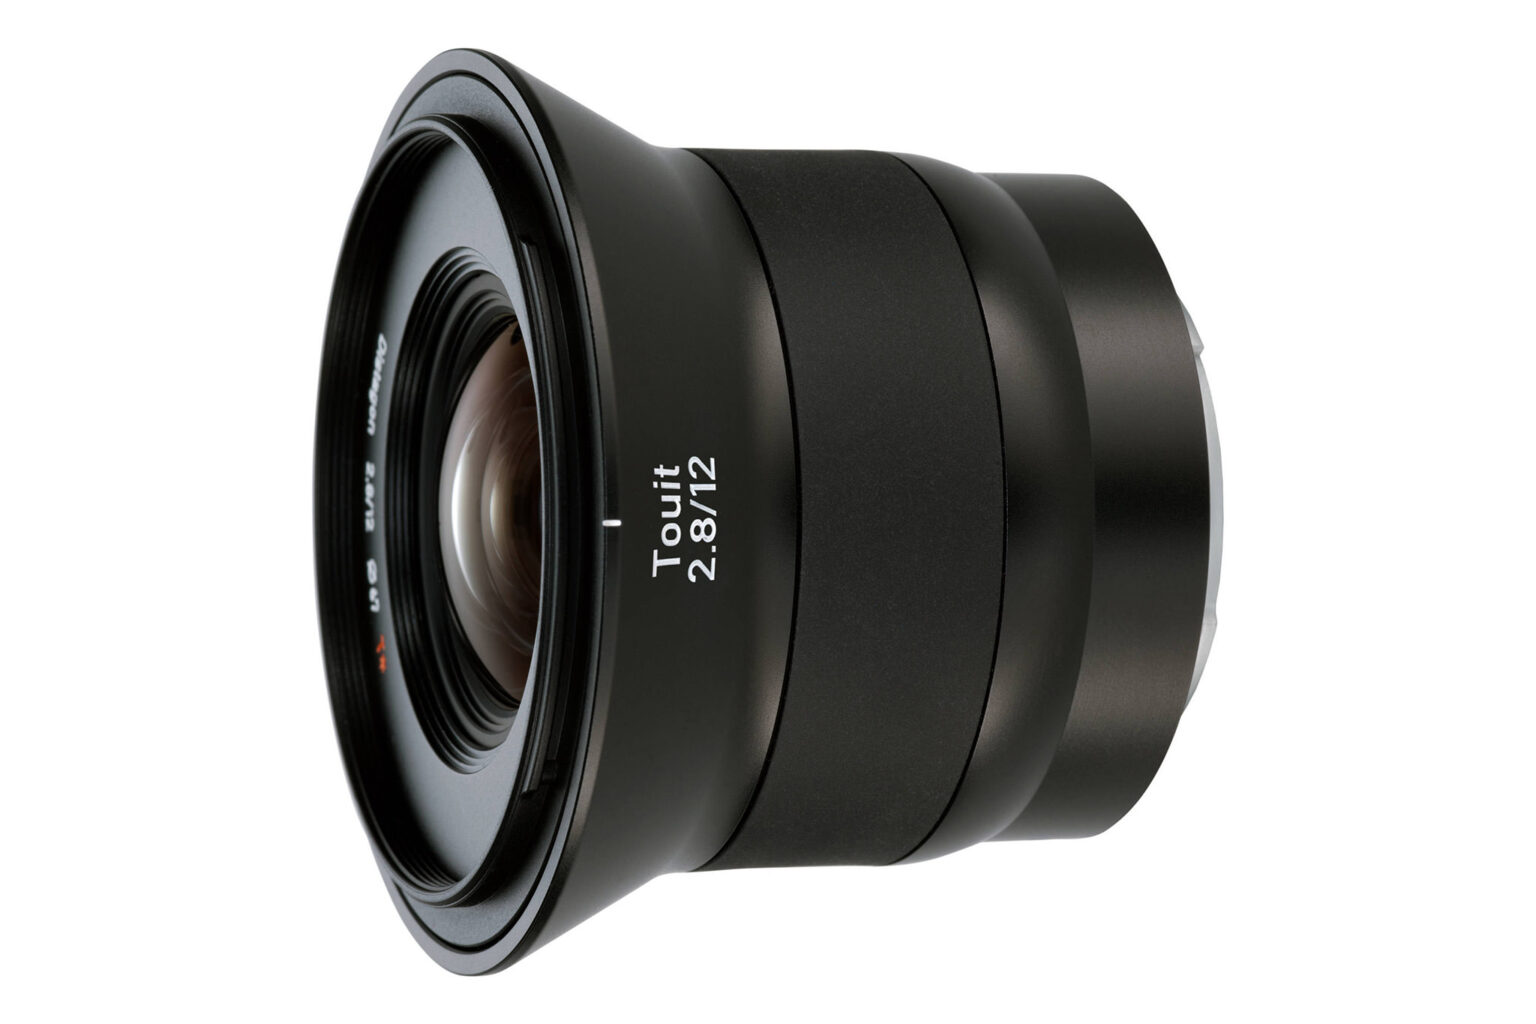 Zeiss Touit 12mm f/2.8 Review